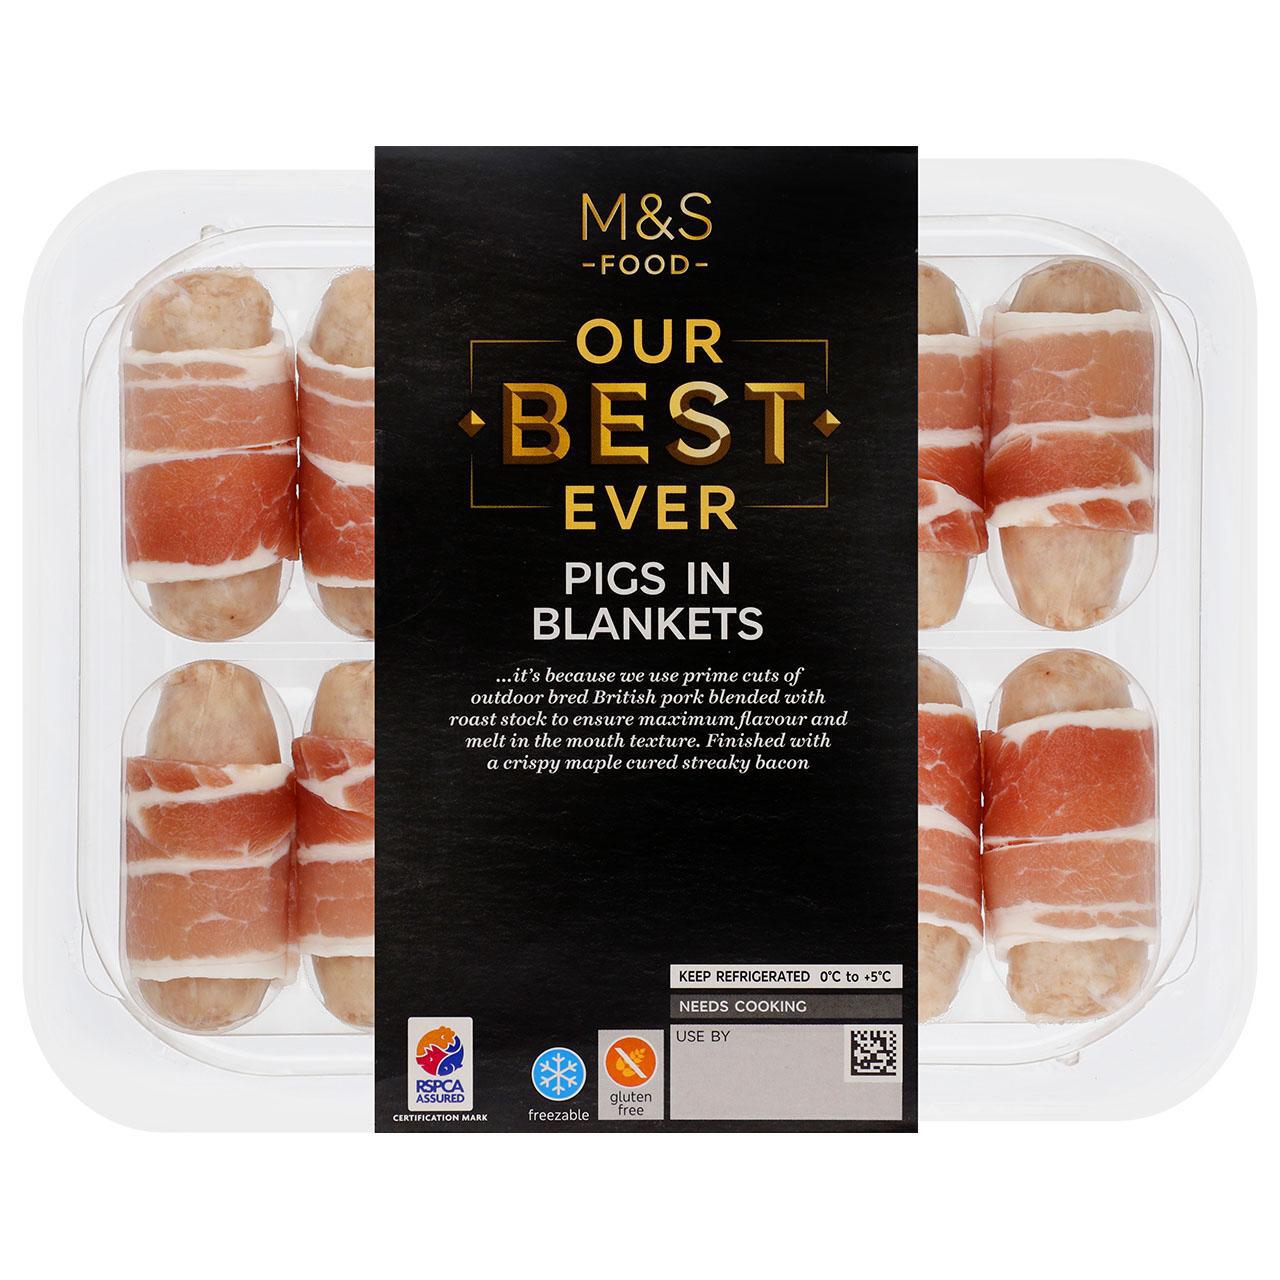 M&S Our Best Ever Pigs in Blankets 342g